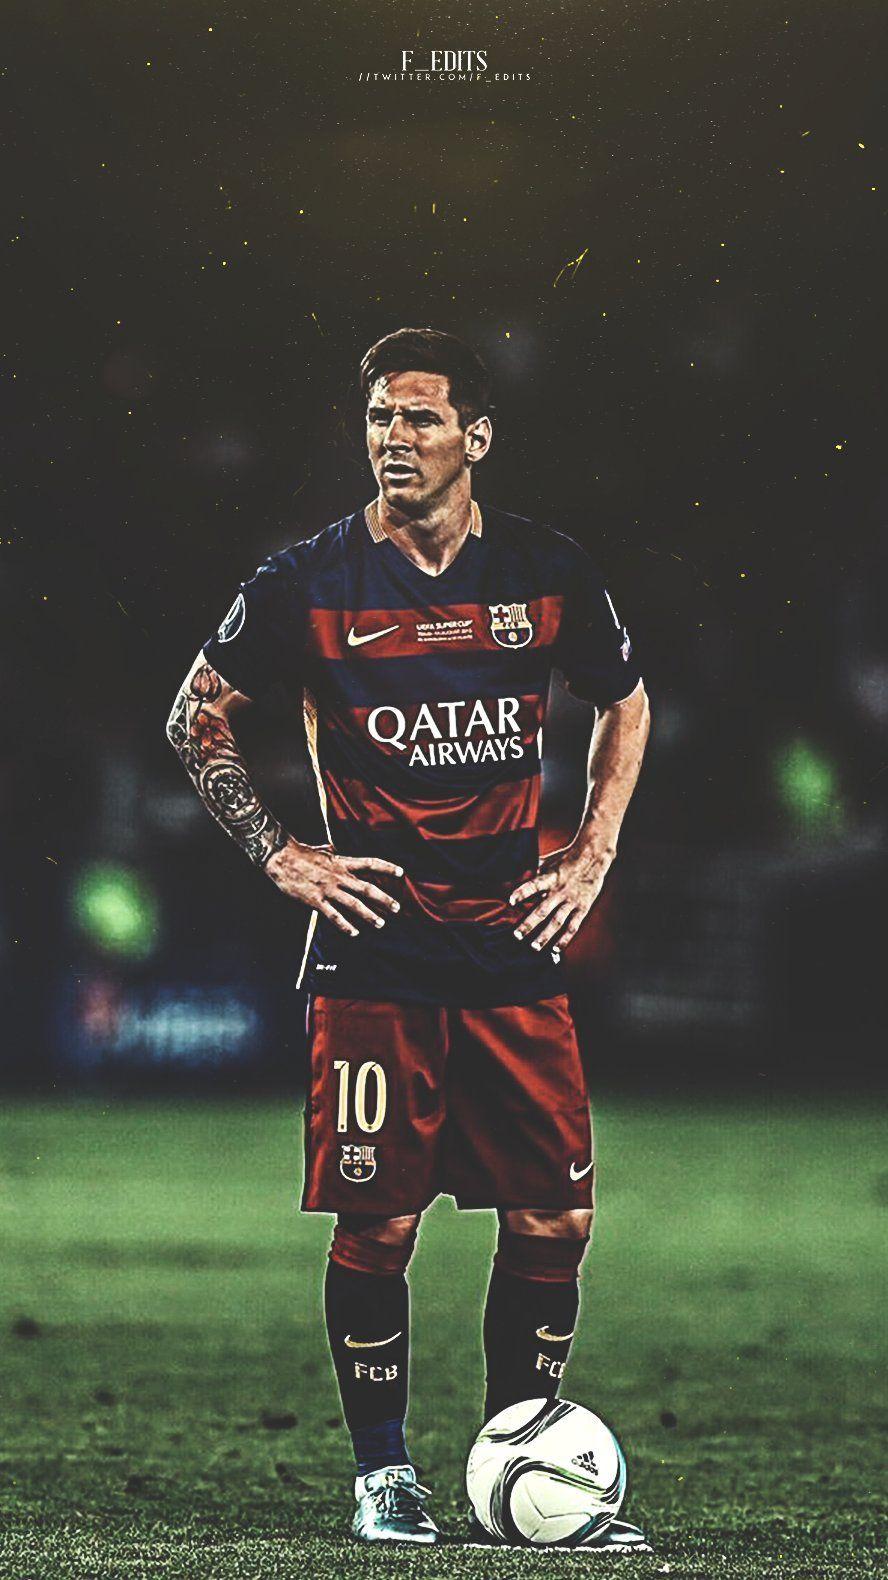 Barça Worldwide sur Twitter  Lionel Messi iPhone wallpaper made by  StormDesignzz LIKE this tweet if you love the edit and if youre  using it as your phone wallpaper send us a